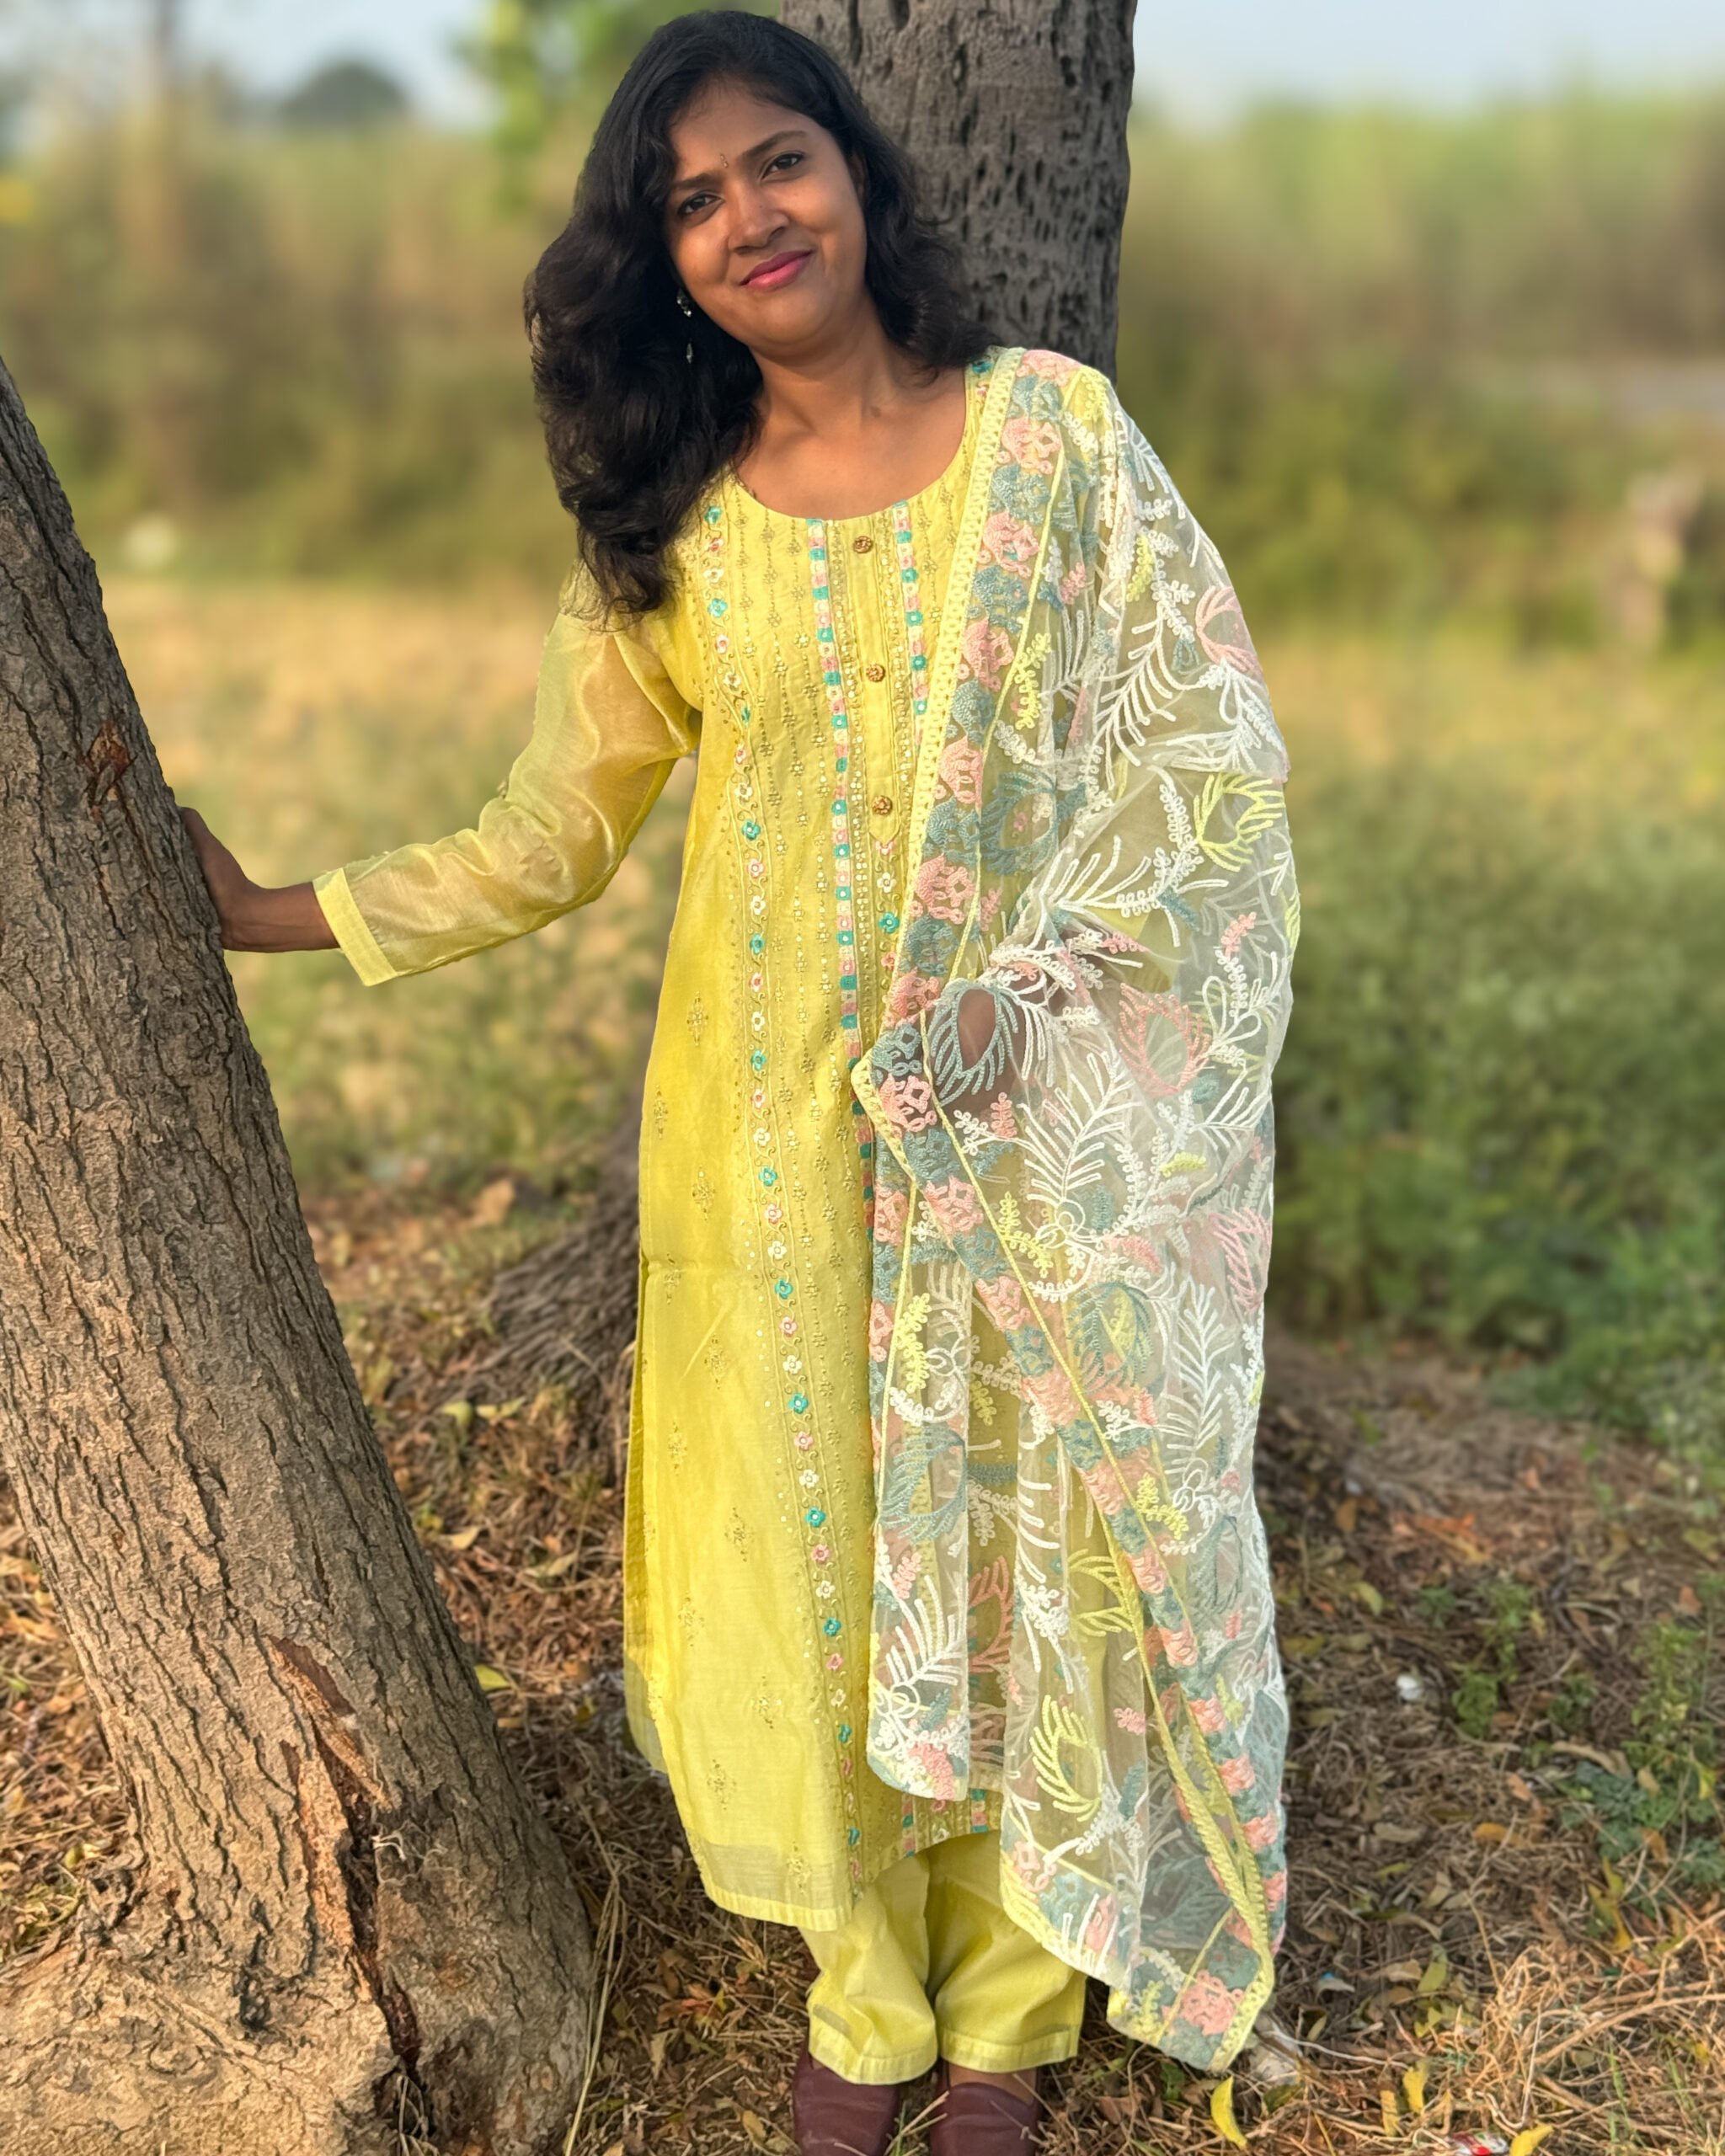 Chanderi cotton salwar top has a beautiful sequins and embroidery pattern comes with lining, elastic waist pant and netted dupatta with embroidery. This will be a perfect choice for any occasion.